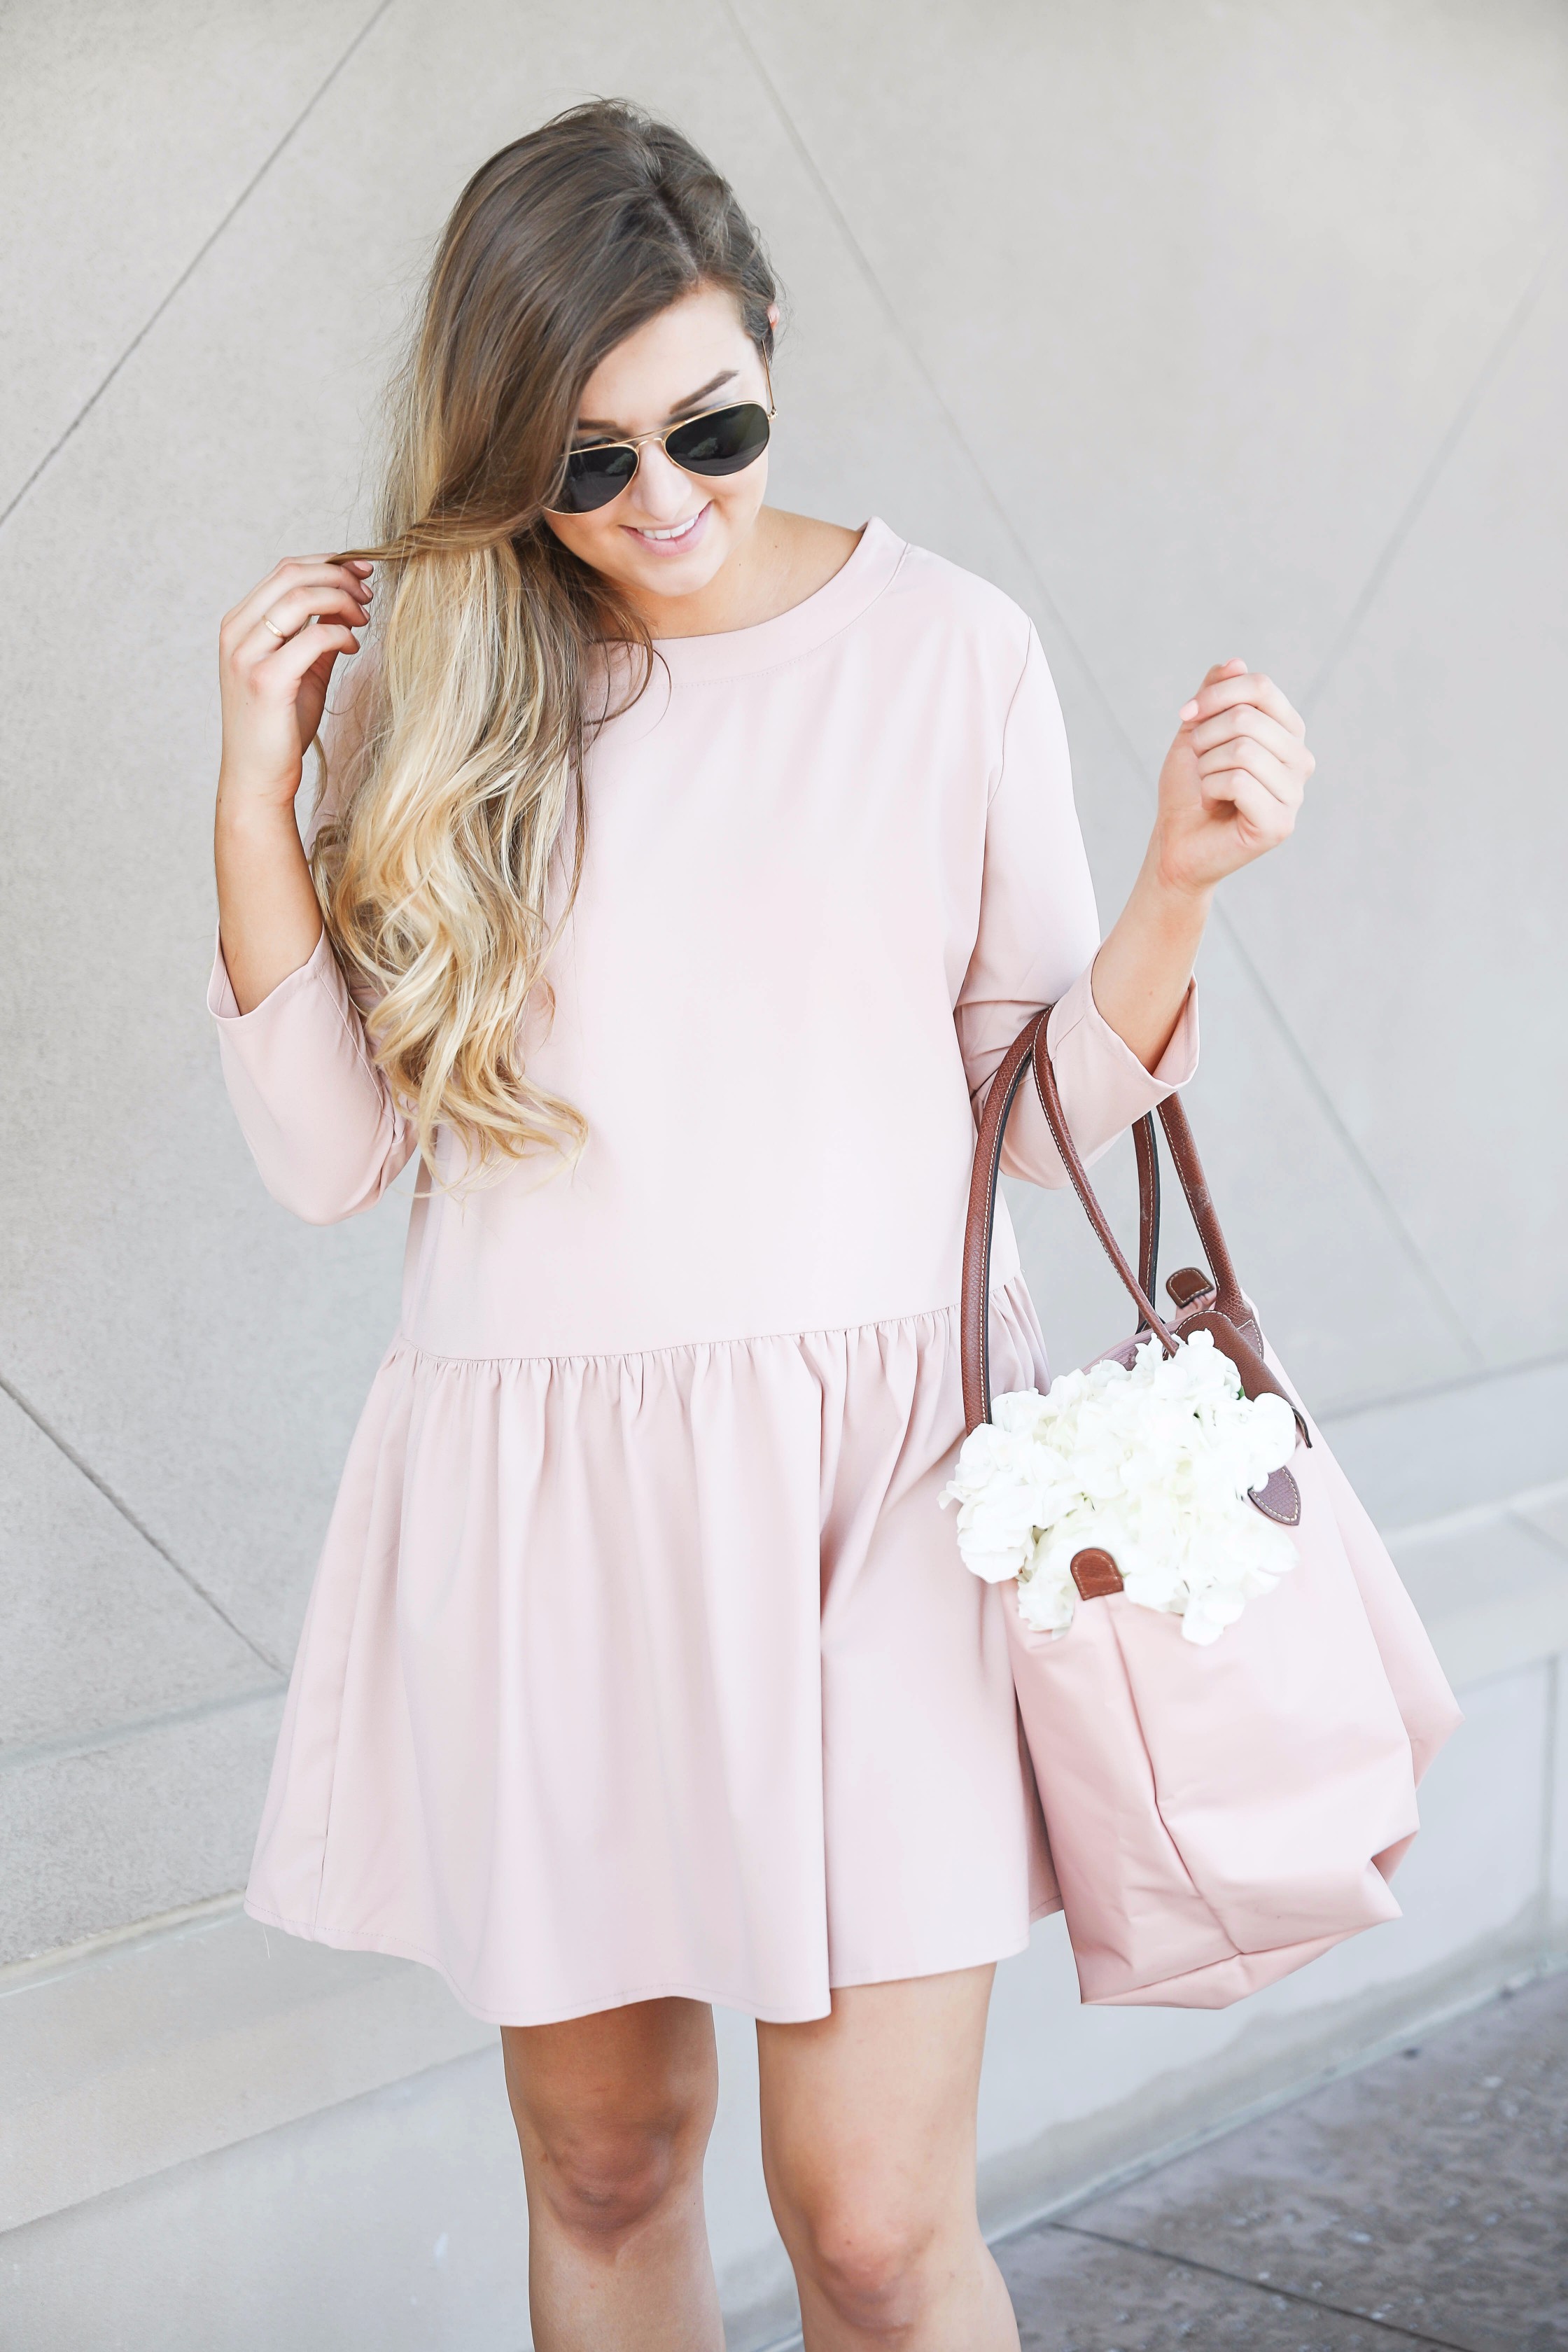 Pink drop waist dress with Adidas sneakers! Such a cute and casual look. I paired it with my favorite light pink longchamp with hydrangeas! By fashion blog daily dose of charm lauren lindmark